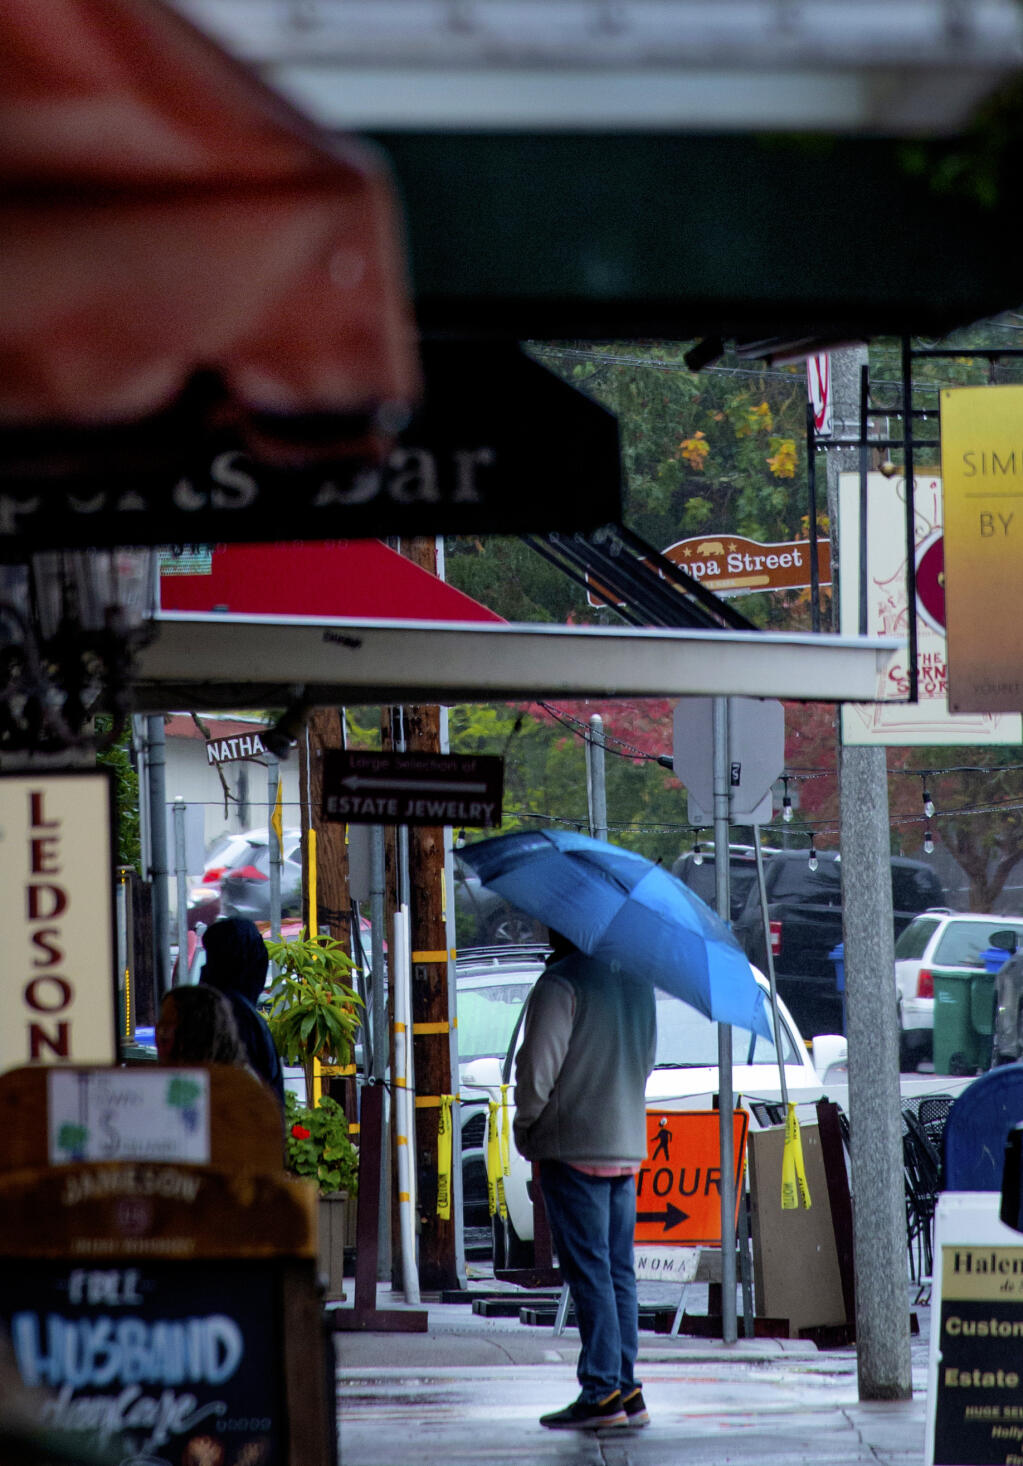 Umbrellas were finally put to use on First Street East when it rained in Sonoma on Wednesday morning, Oct. 20, 2021. (Photo by Robbi Pengelly/Index-Tribune)